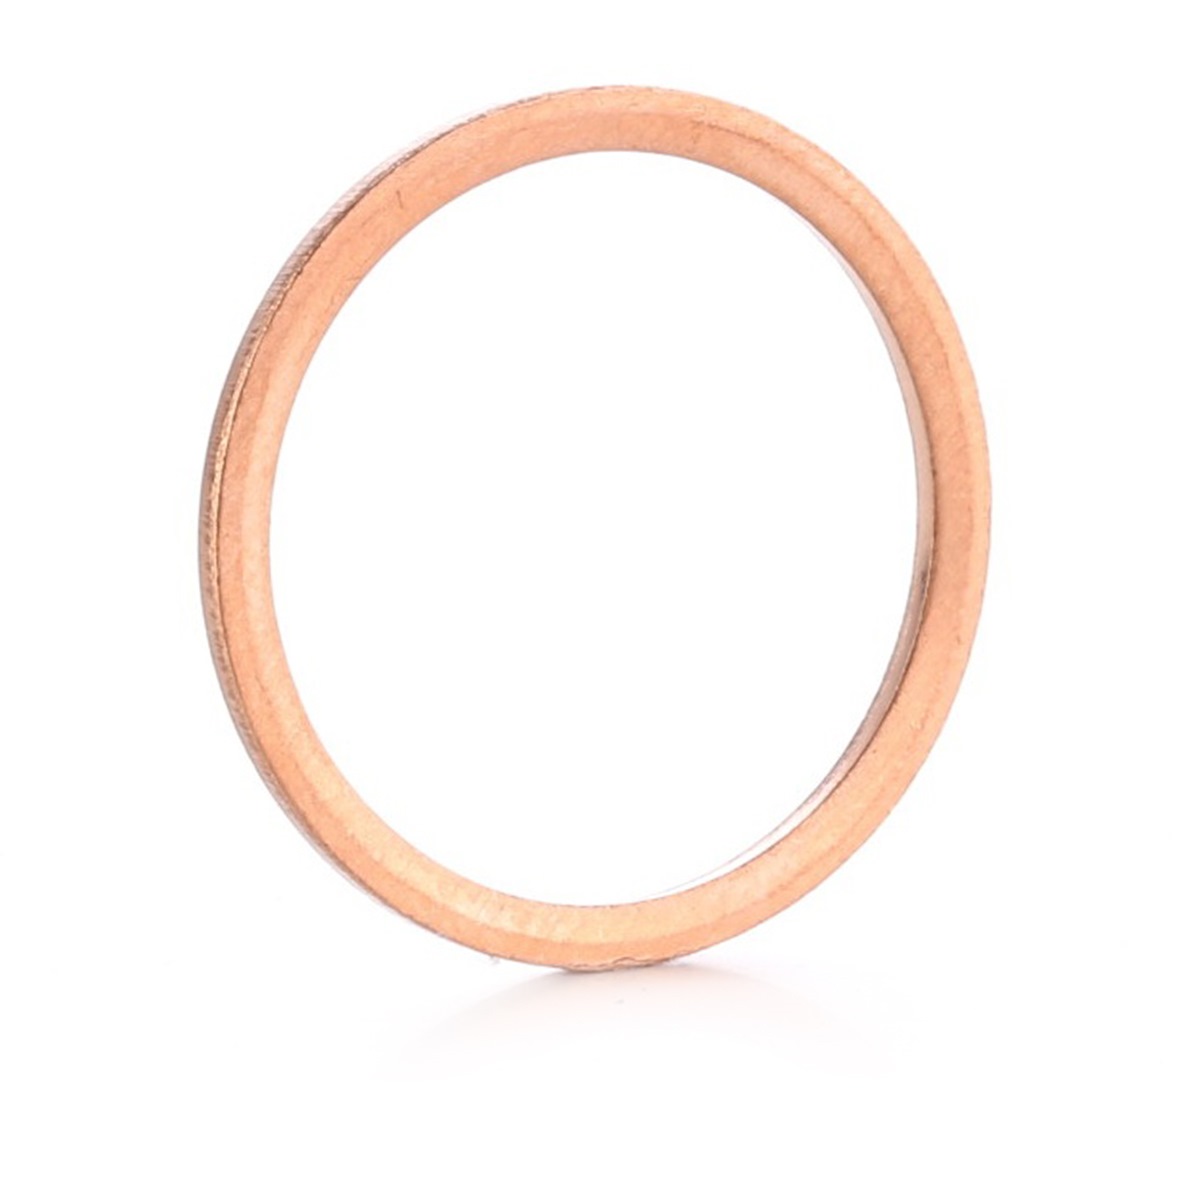 ELRING 030.953 Seal Ring 20 x 1,5 mm, A Shape, Copper, DIN/ISO 7603